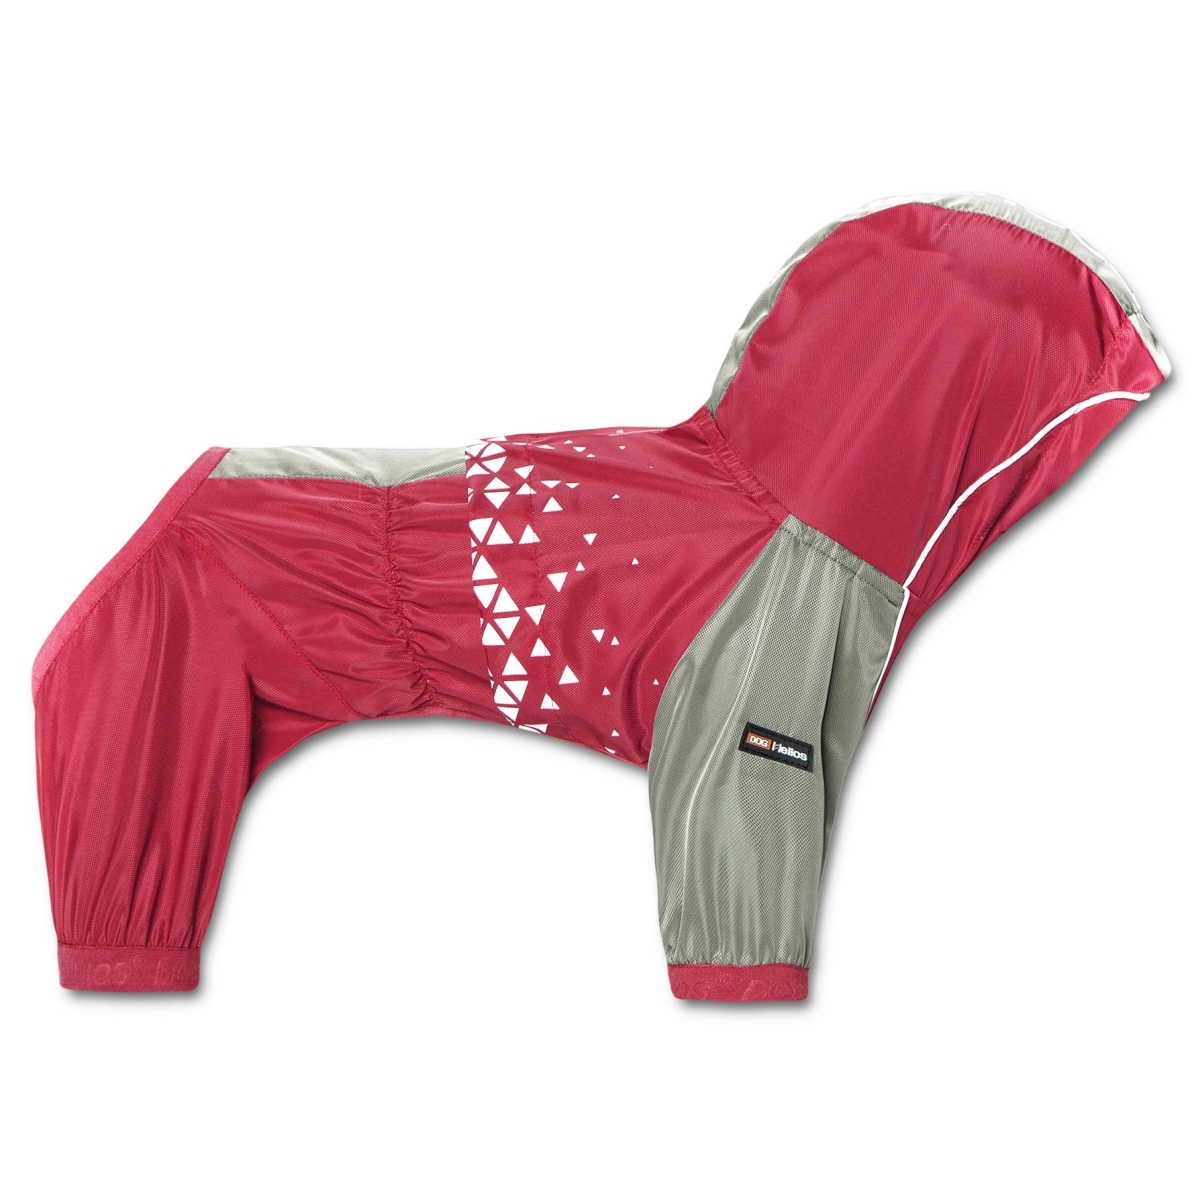 Picture of Dog Helios JKHL15RDLG Vortex Full Bodied Waterproof Windbreaker Dog Jacket - Red - Large